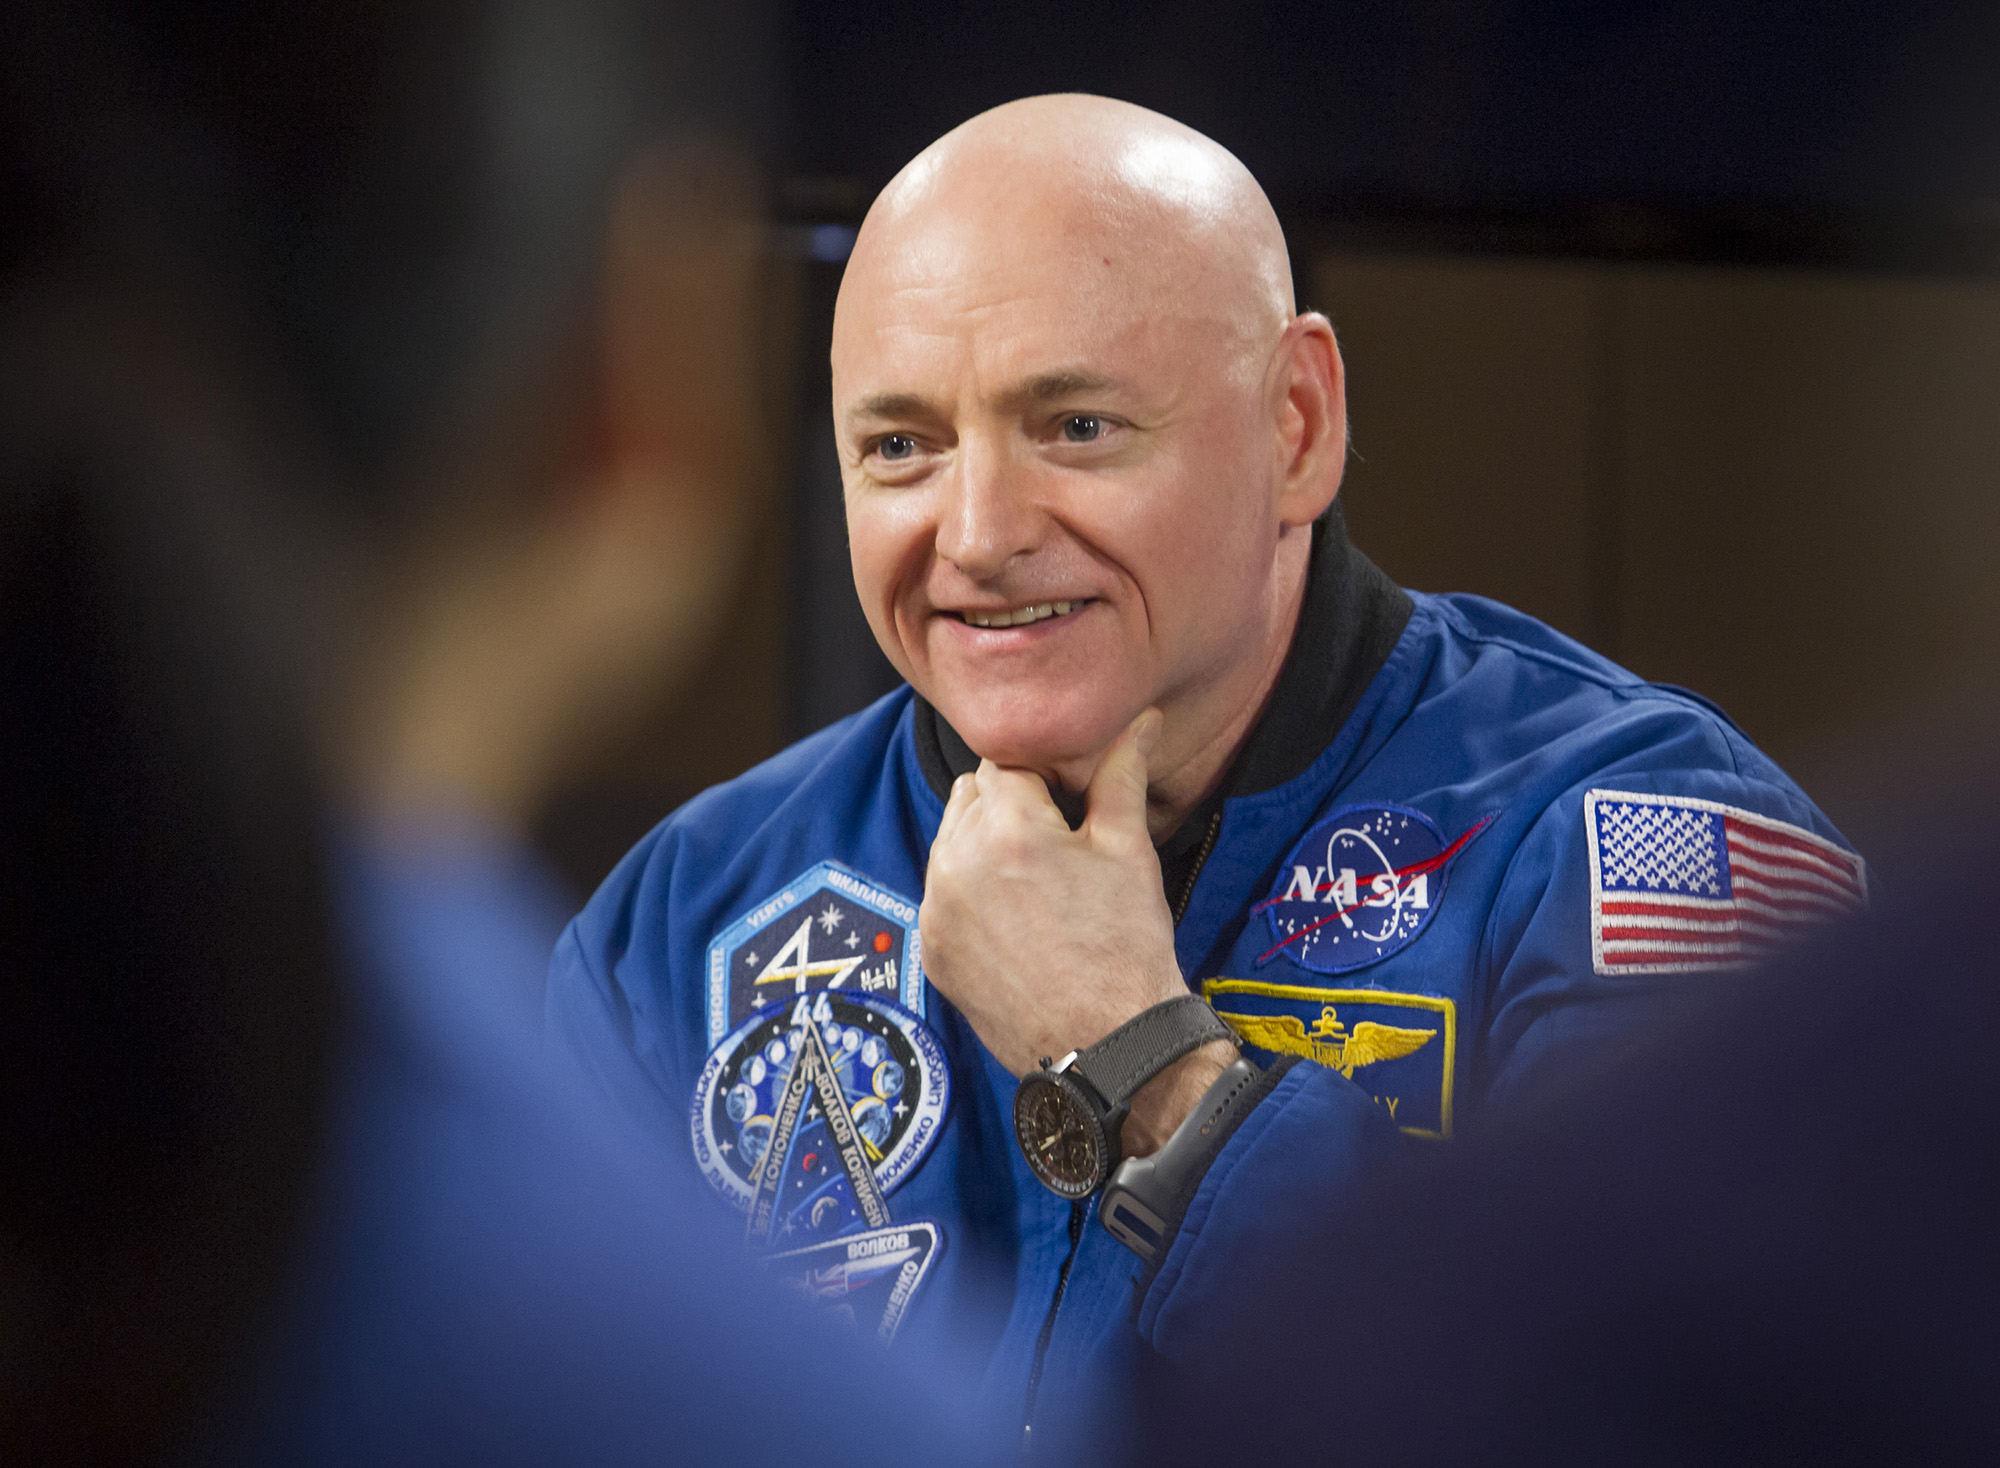 NASA astronaut Scott Kelly speaks during a press conference March 4 at Johnson Space Center in Houston. He recently returned to Earth after 340 days in space. Photo courtesy of Stuart Villanueva, Galveston County Daily News.